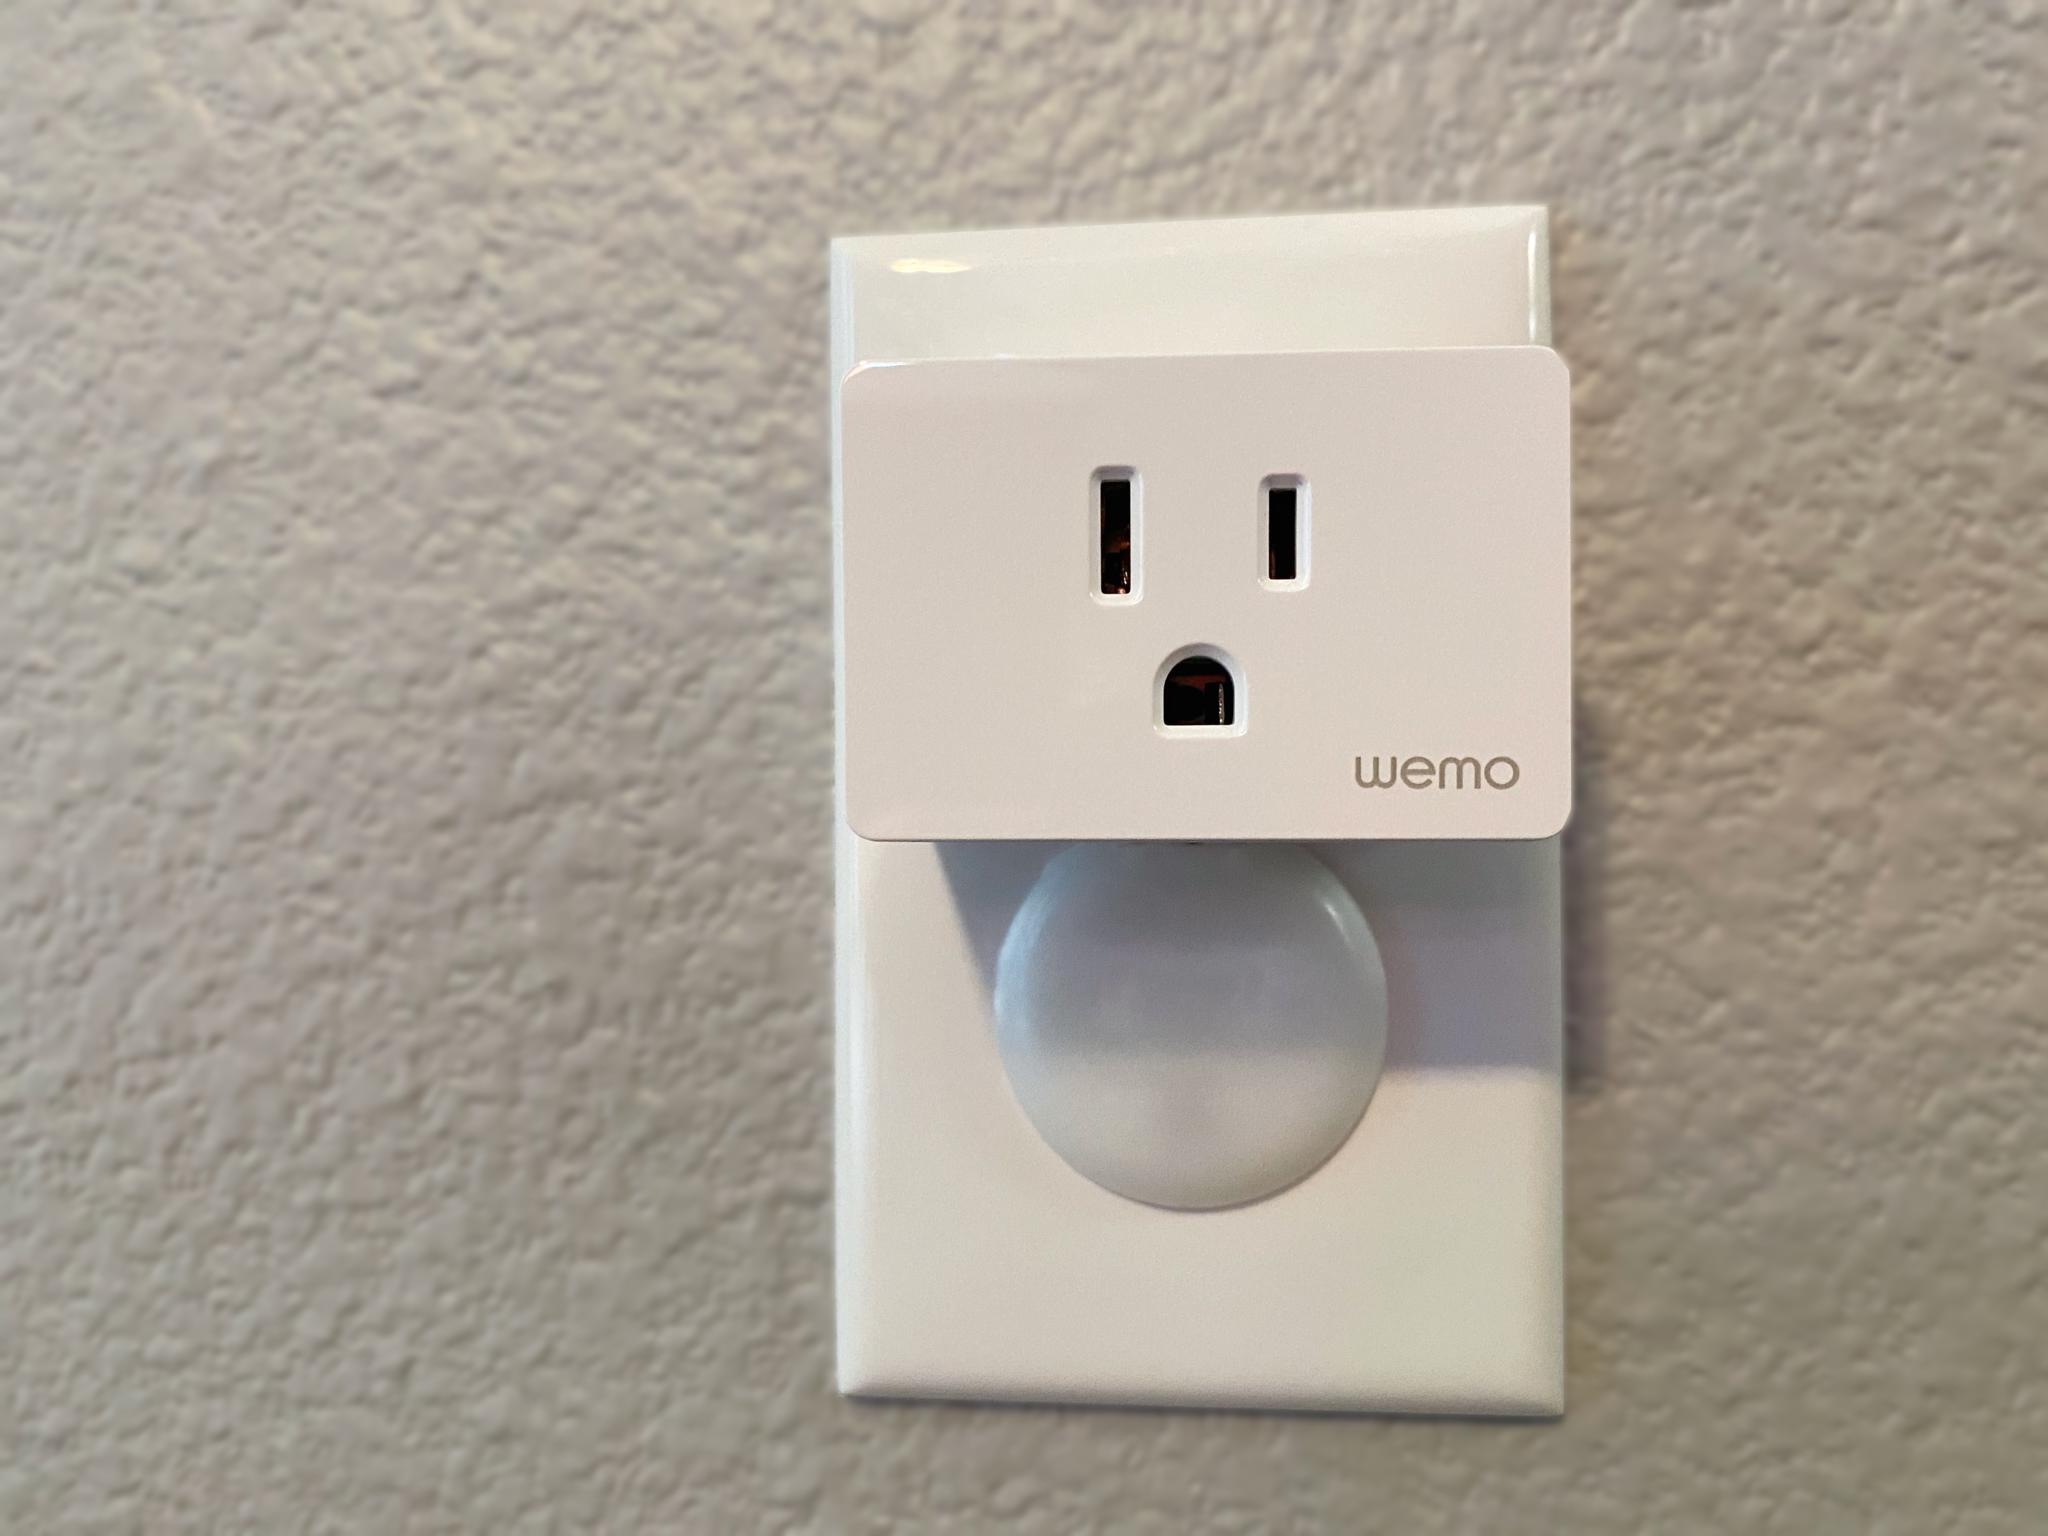 Wemo Wifi Smart Plug front view installed in an outlet